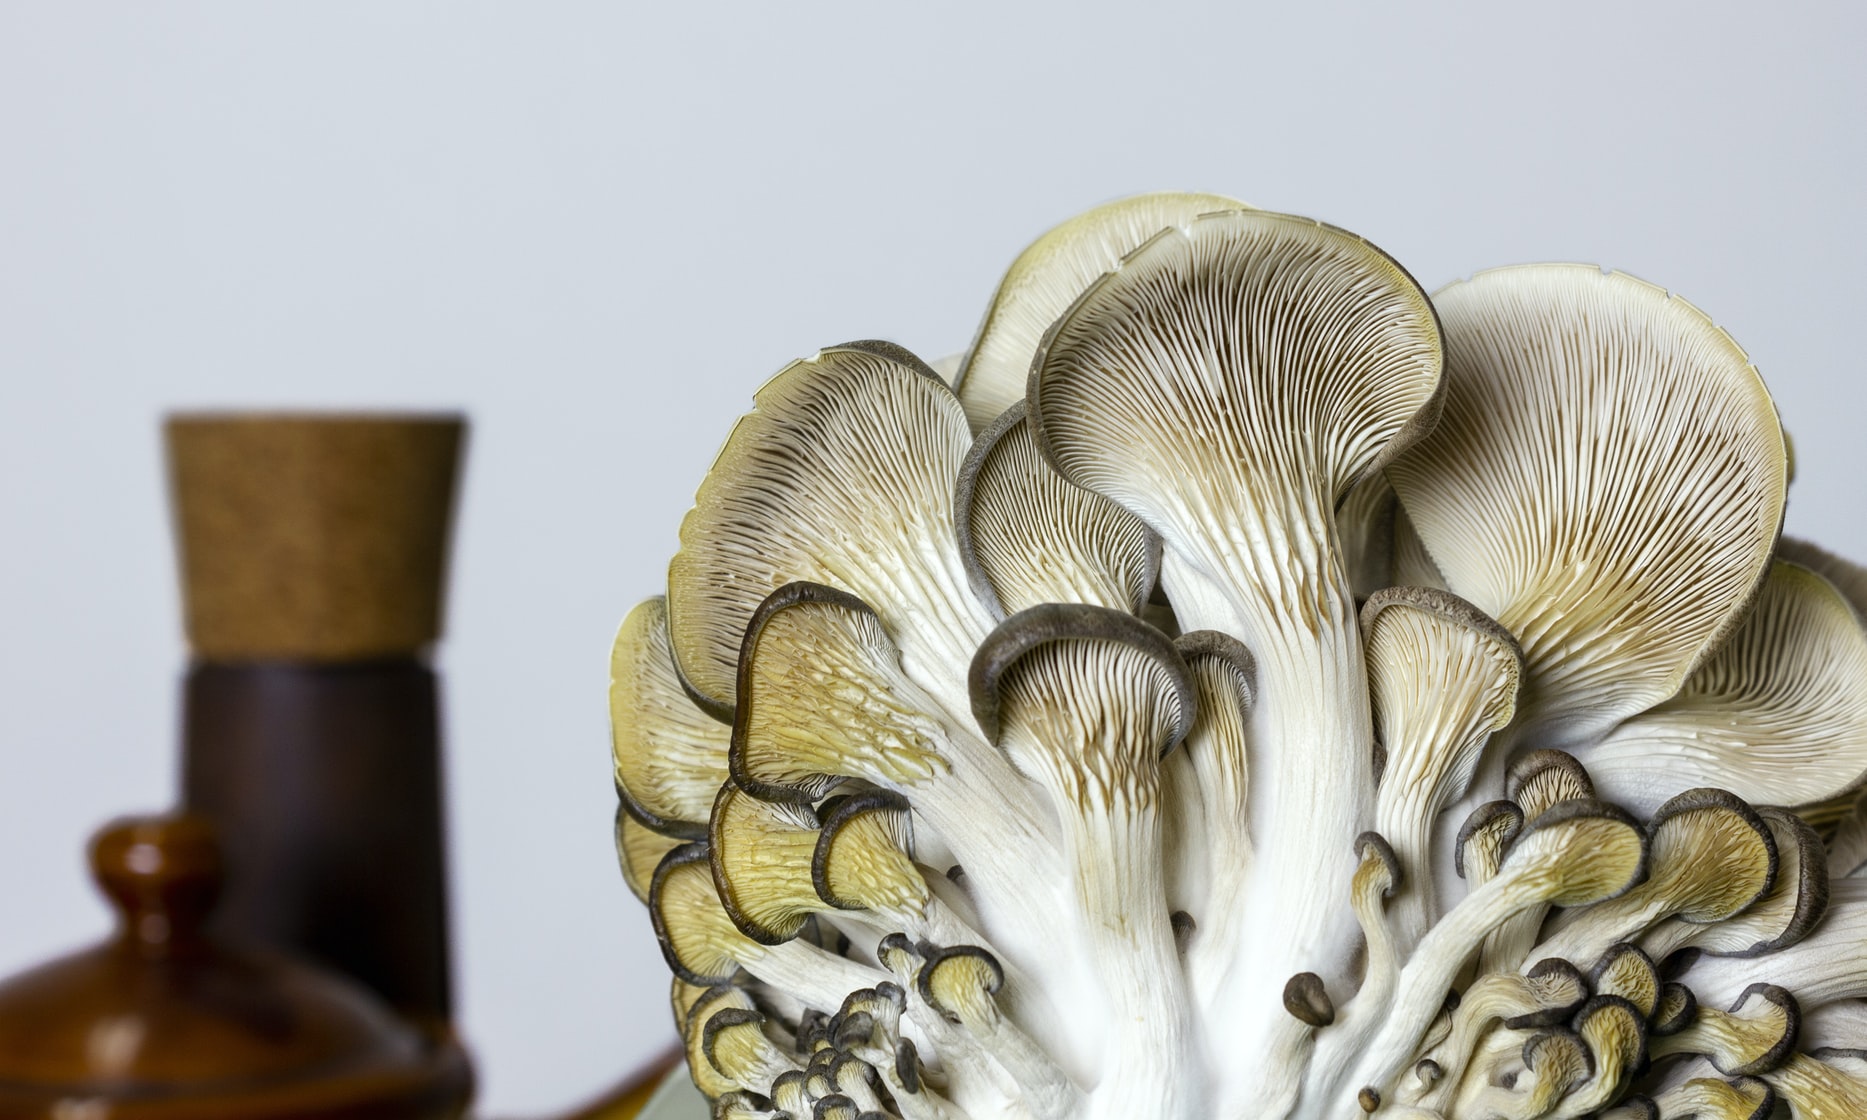 7 of the Best Mushroom Kits to Grown your Own at Home